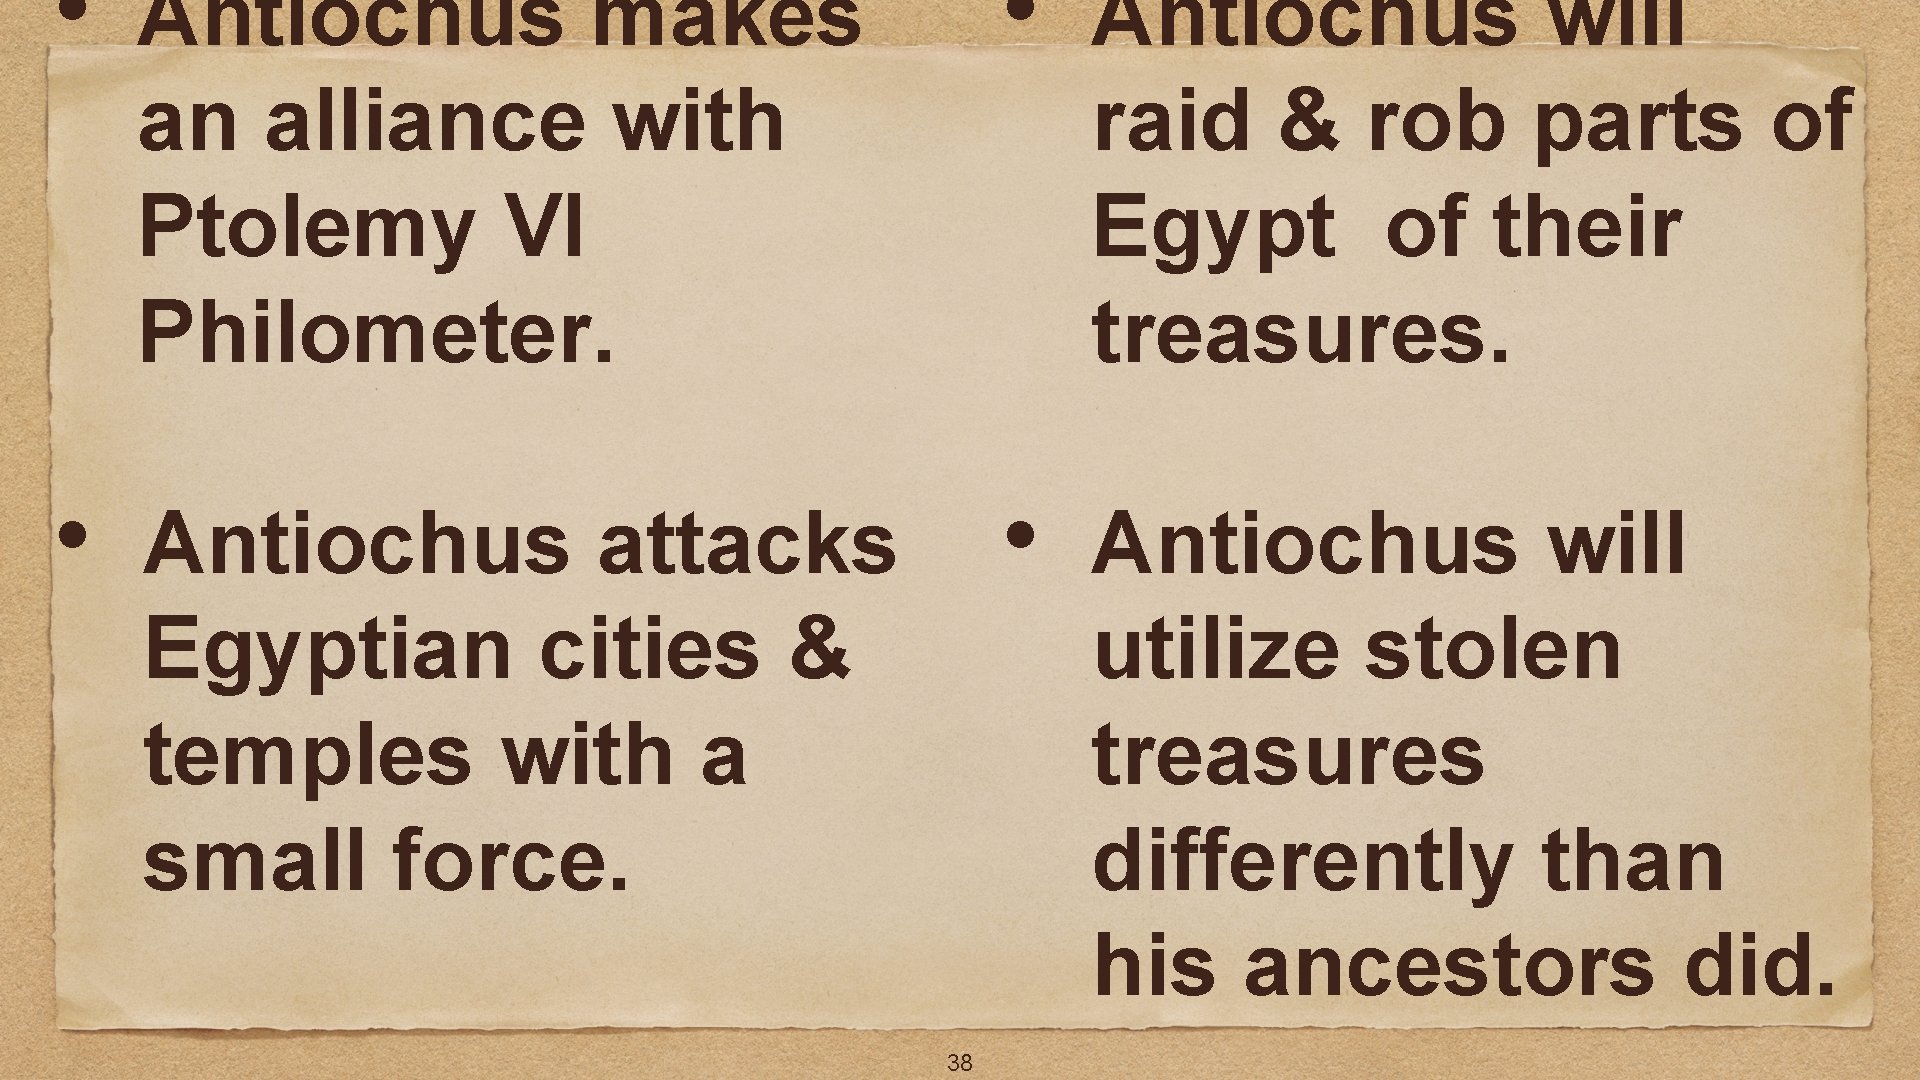  • Antiochus makes an alliance with Ptolemy VI Philometer. • Antiochus will raid